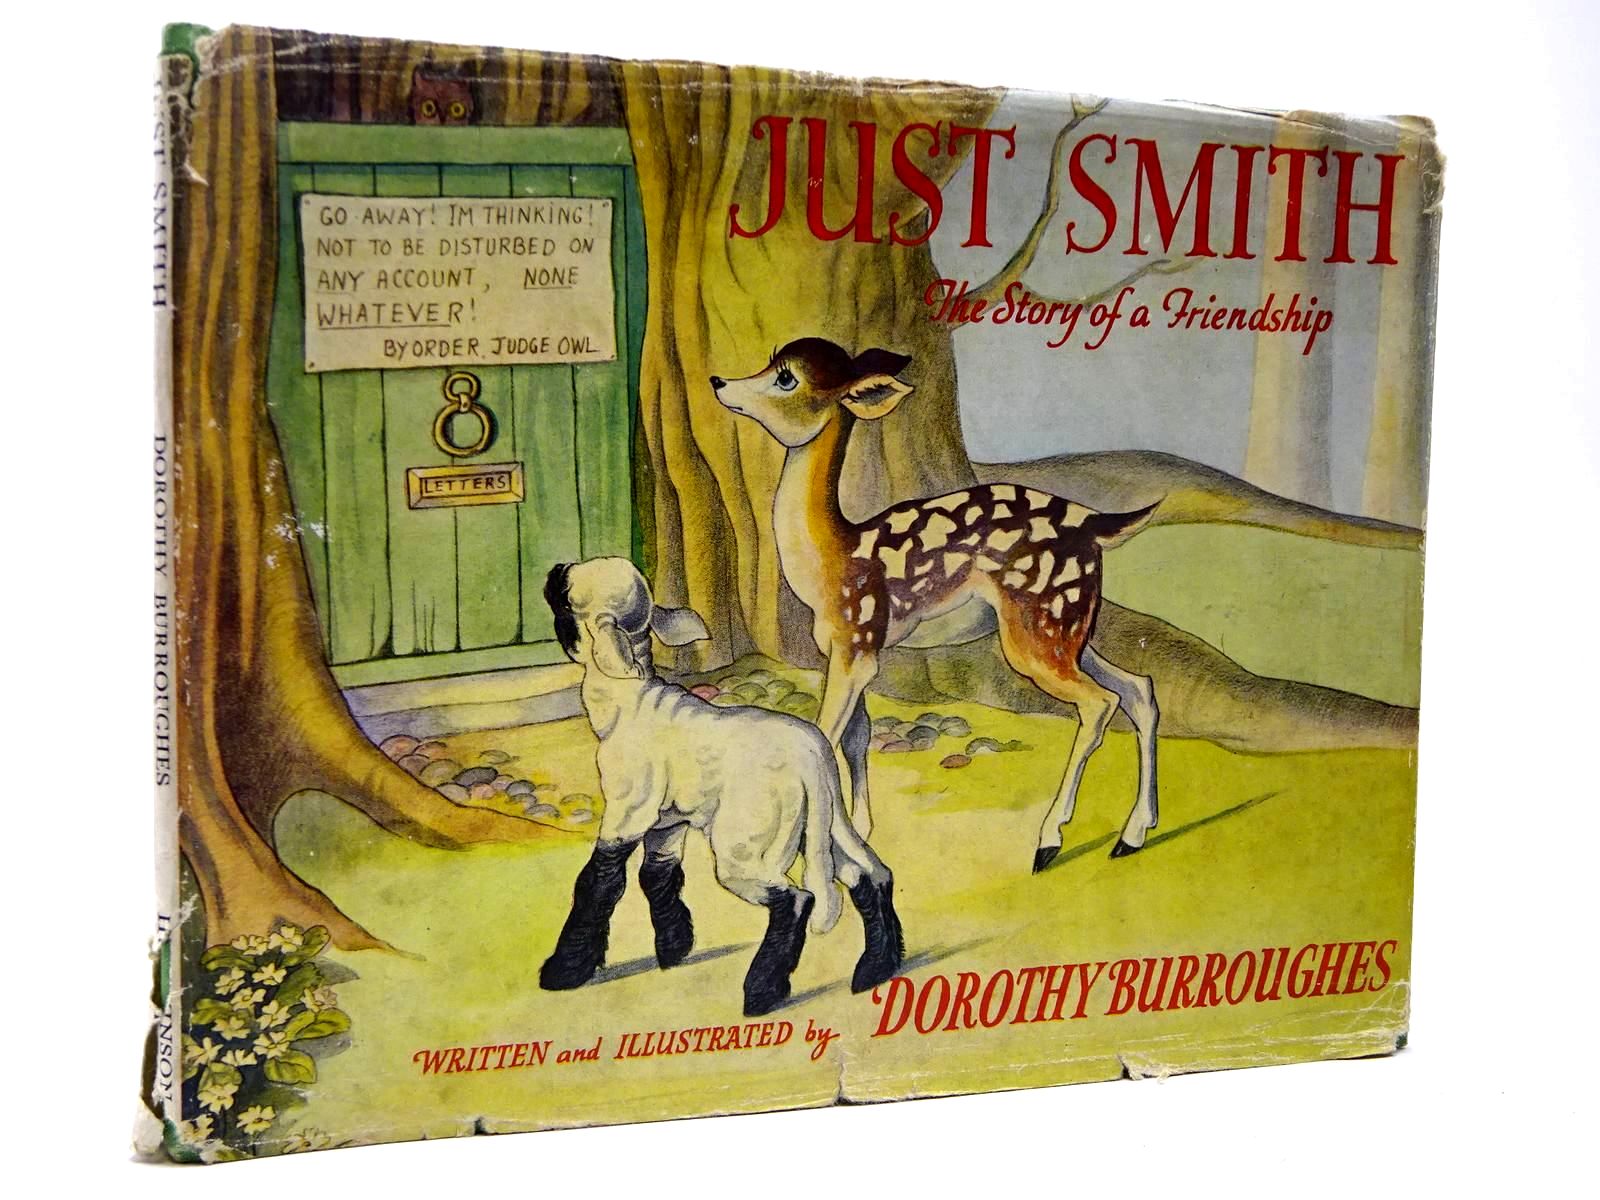 Photo of JUST SMITH written by Burroughes, Dorothy illustrated by Burroughes, Dorothy published by Hutchinson & Co. Ltd (STOCK CODE: 2130299)  for sale by Stella & Rose's Books